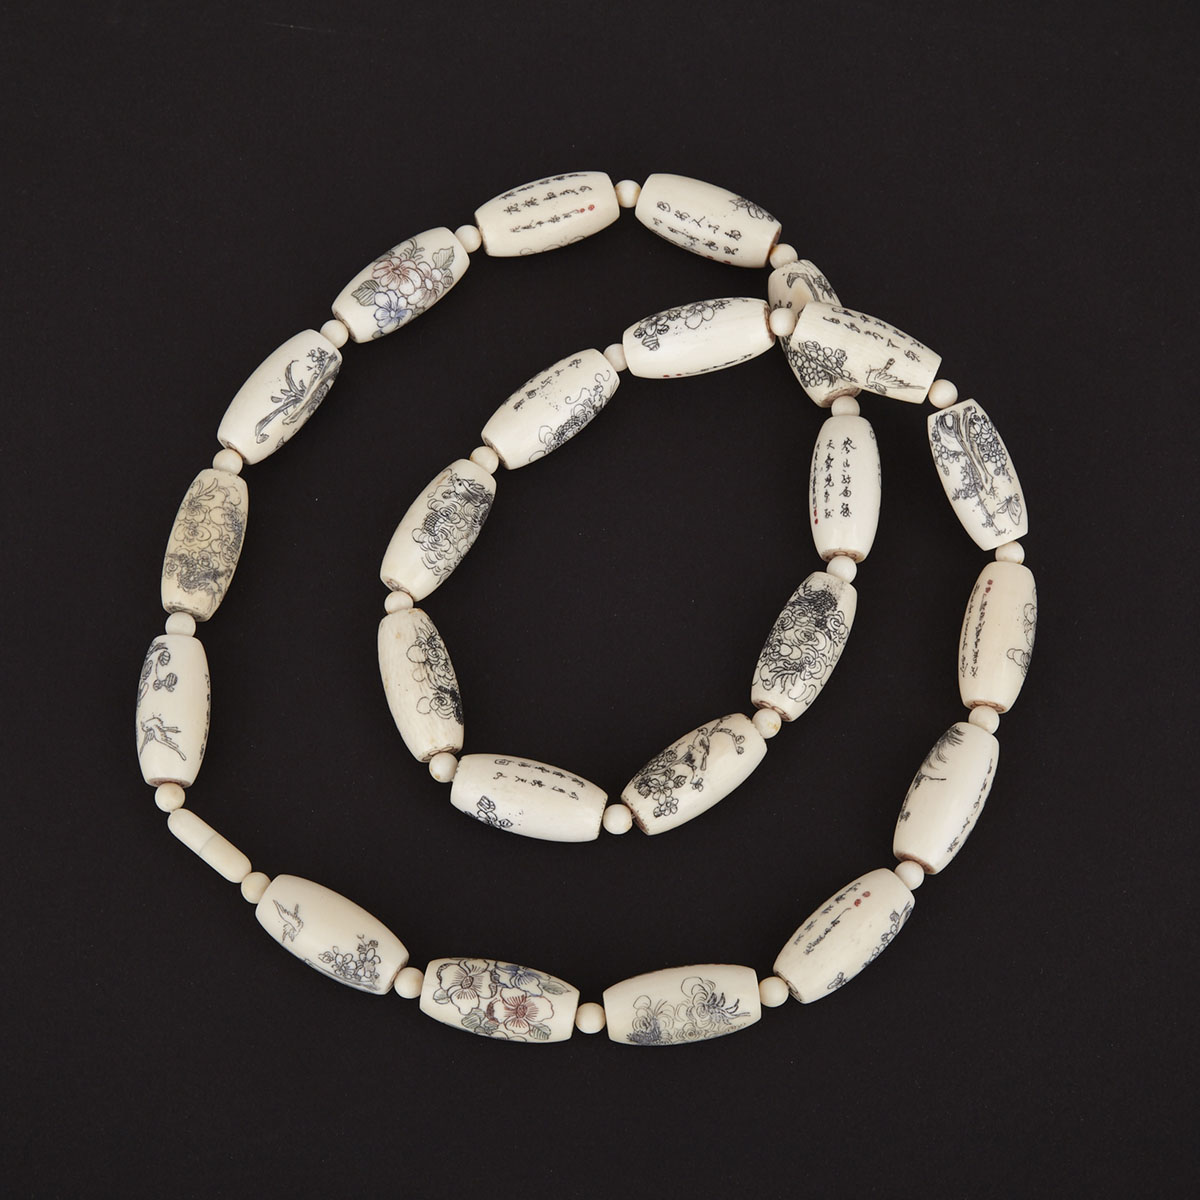 Strand of Carved Ivory Beads, Circa 1940